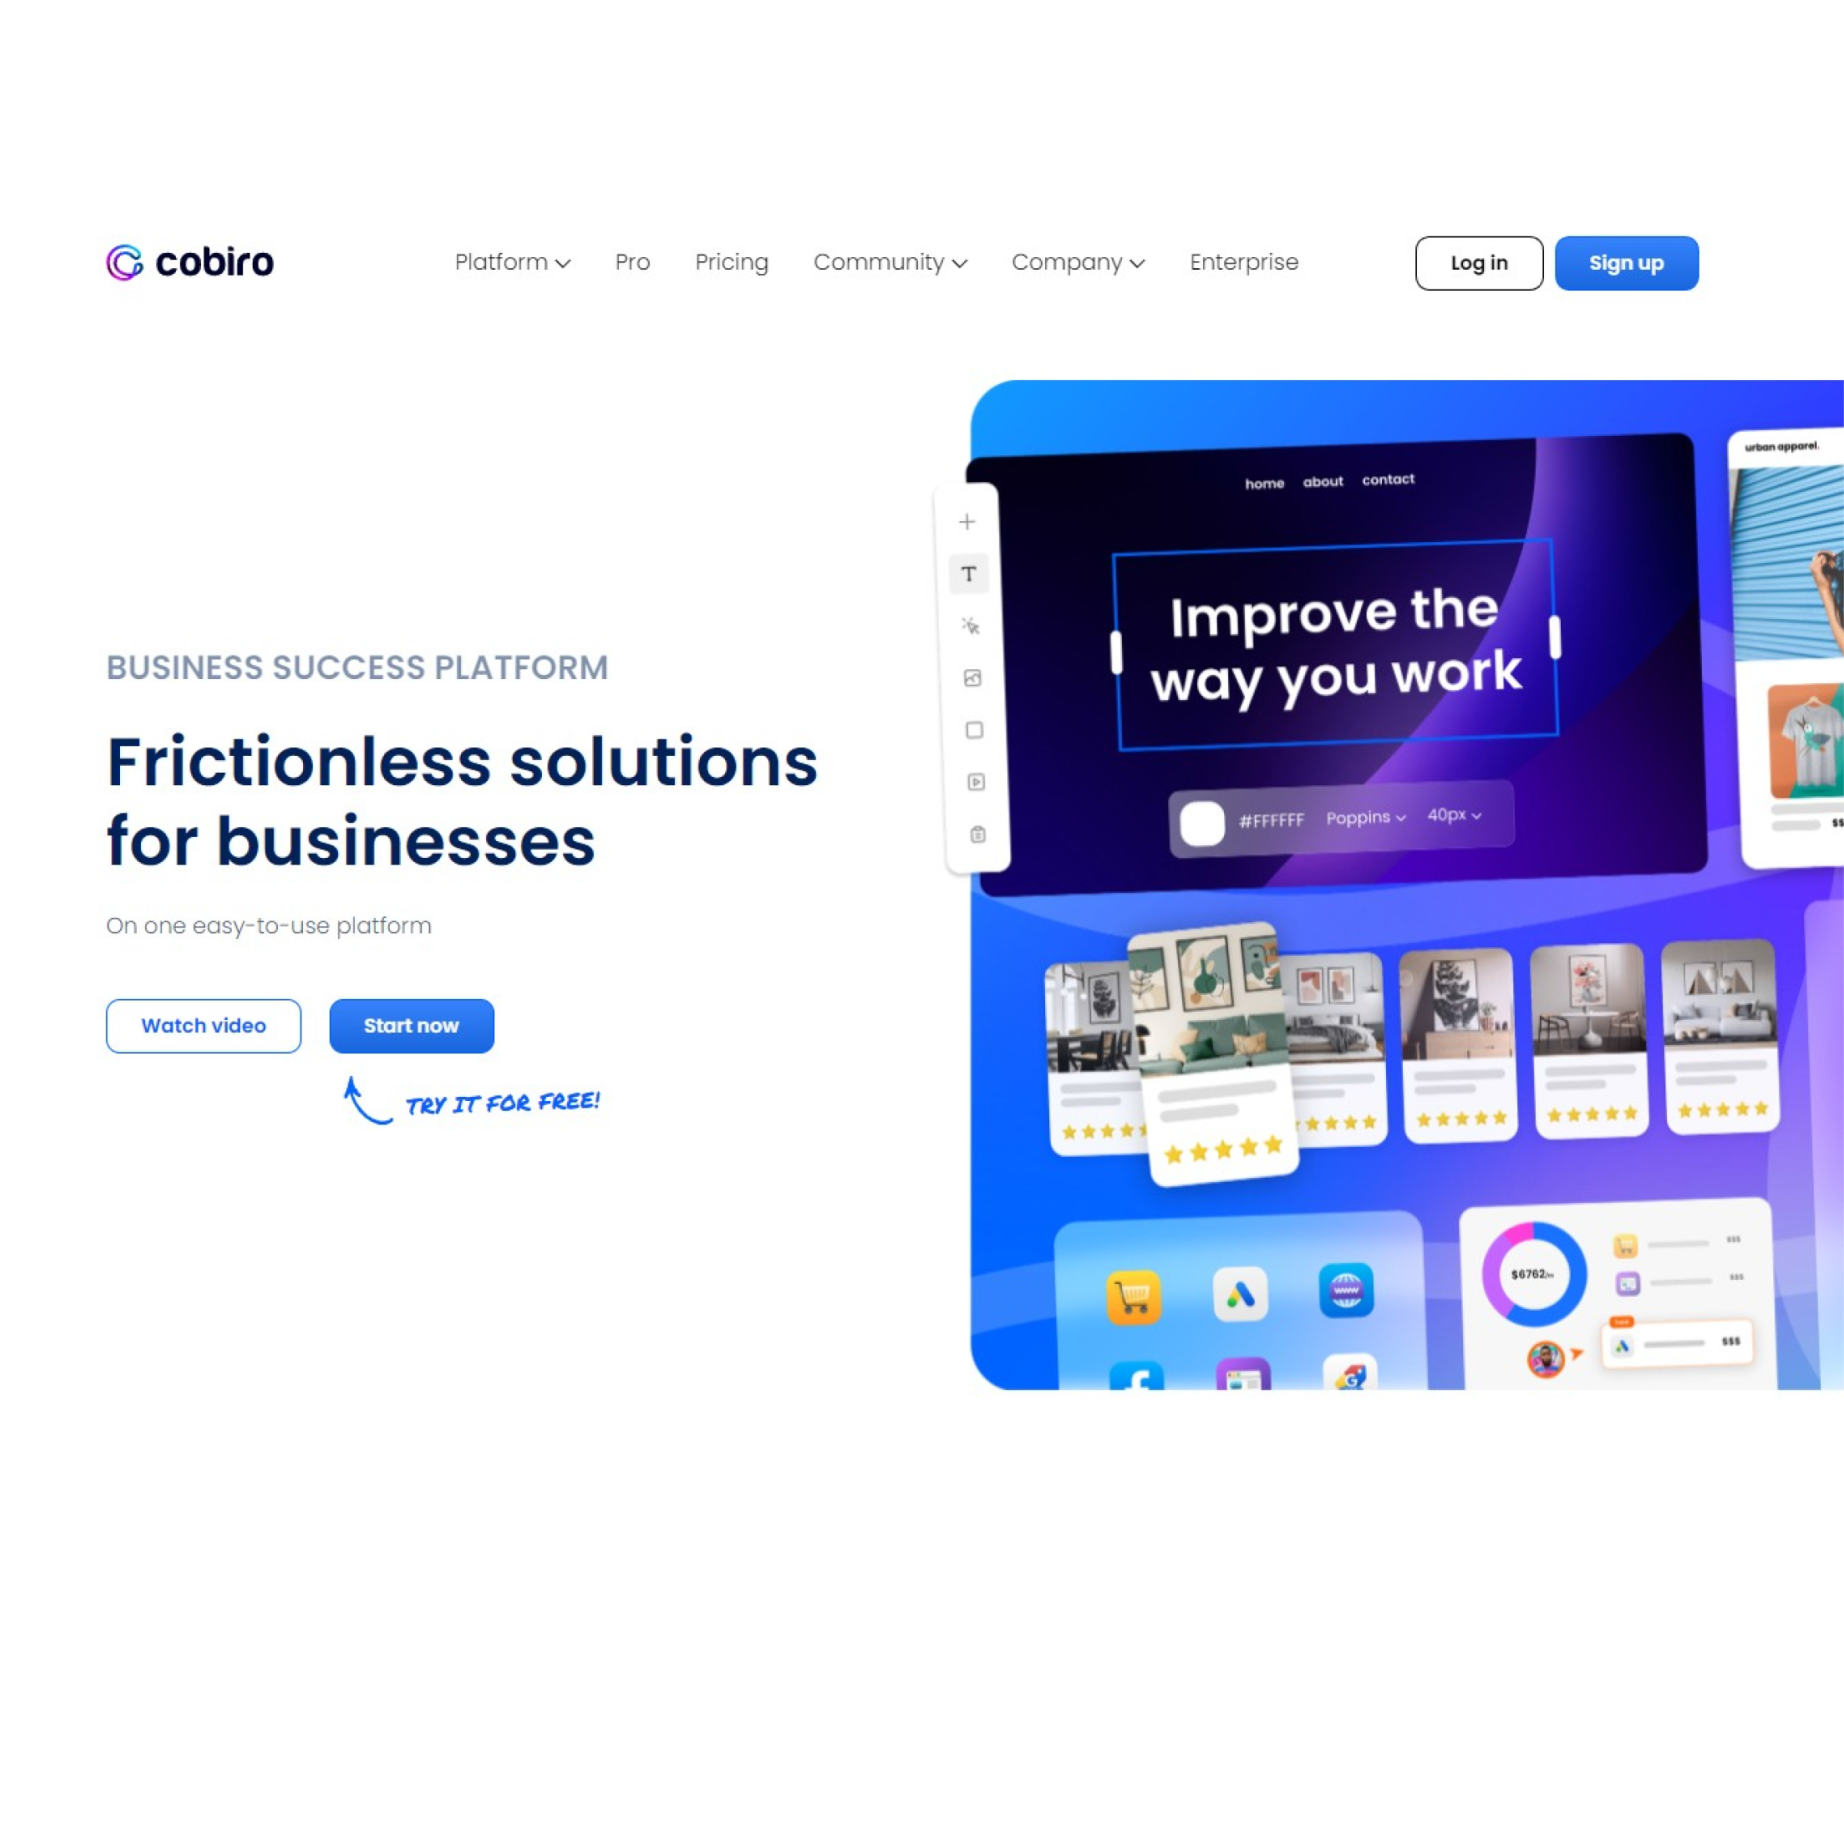 Homepage of Cobiro's website presenting their Business Success Platform, offering frictionless solutions for businesses with an easy-to-use interface.